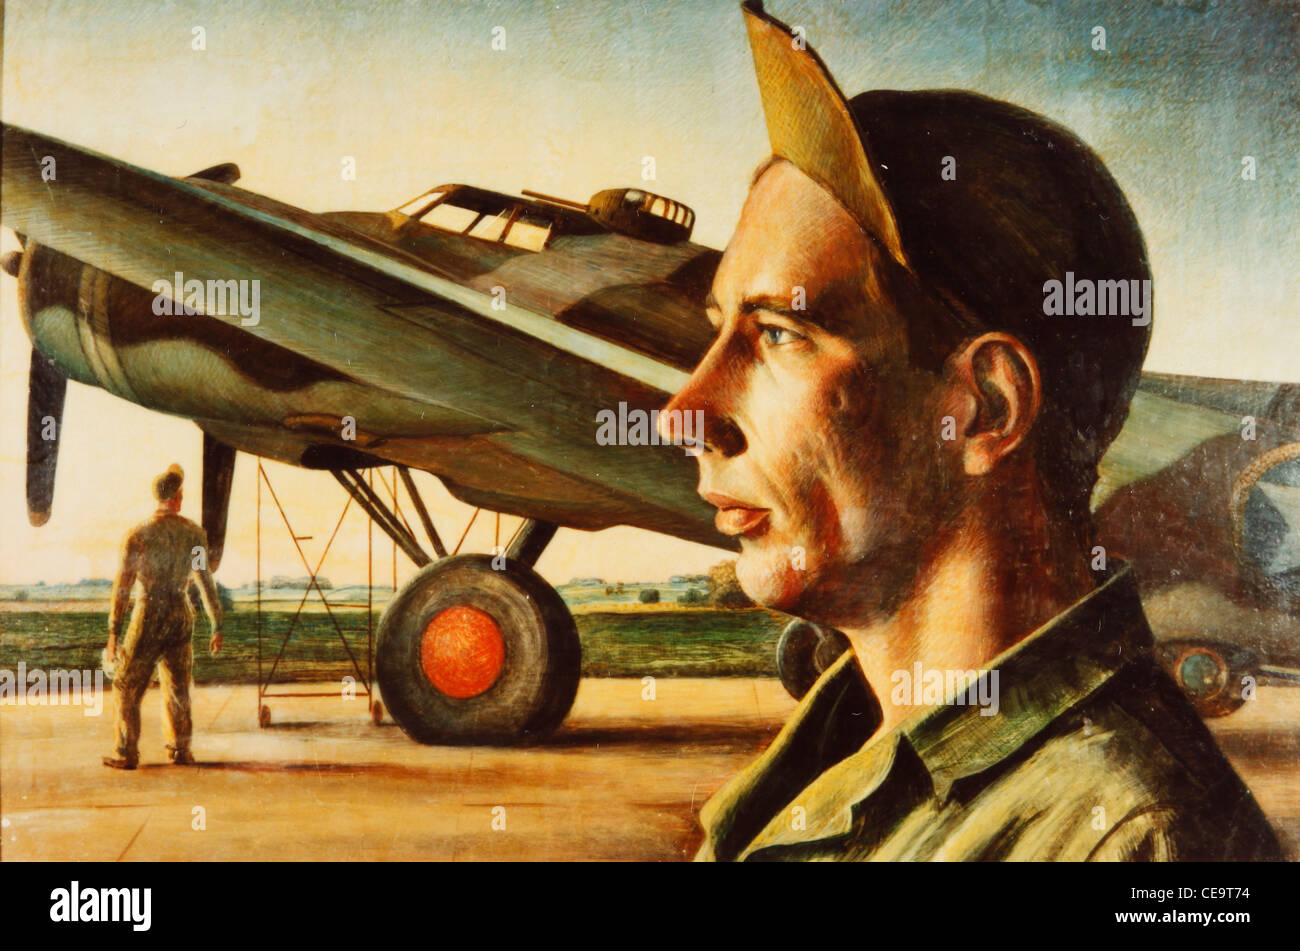 Crew chief - England 1942 during WWII bomber painting portrait Stock Photo